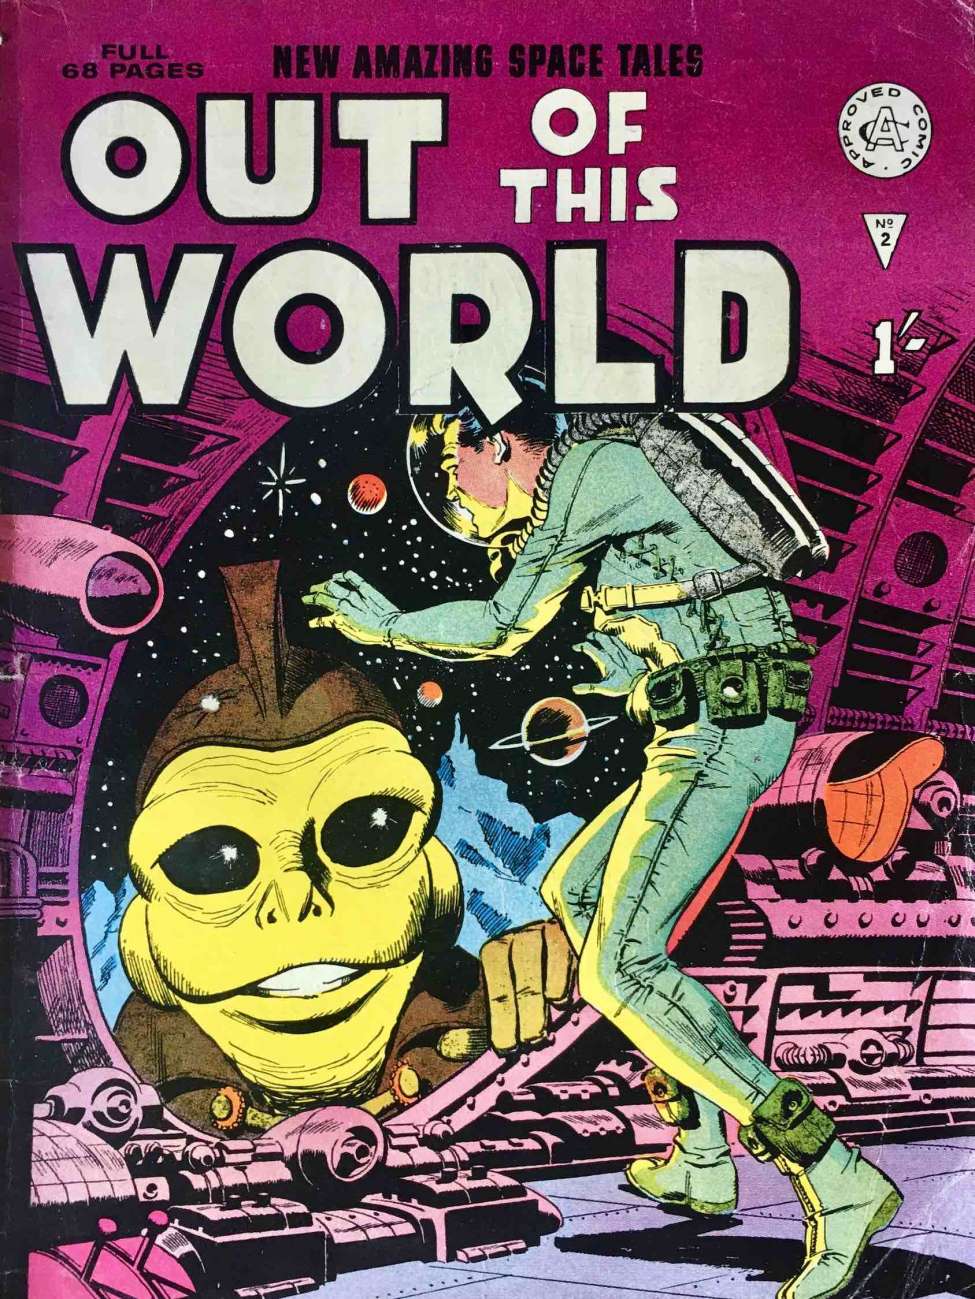 Out of this World 2 (UK Comic Books) - Comic Book Plus